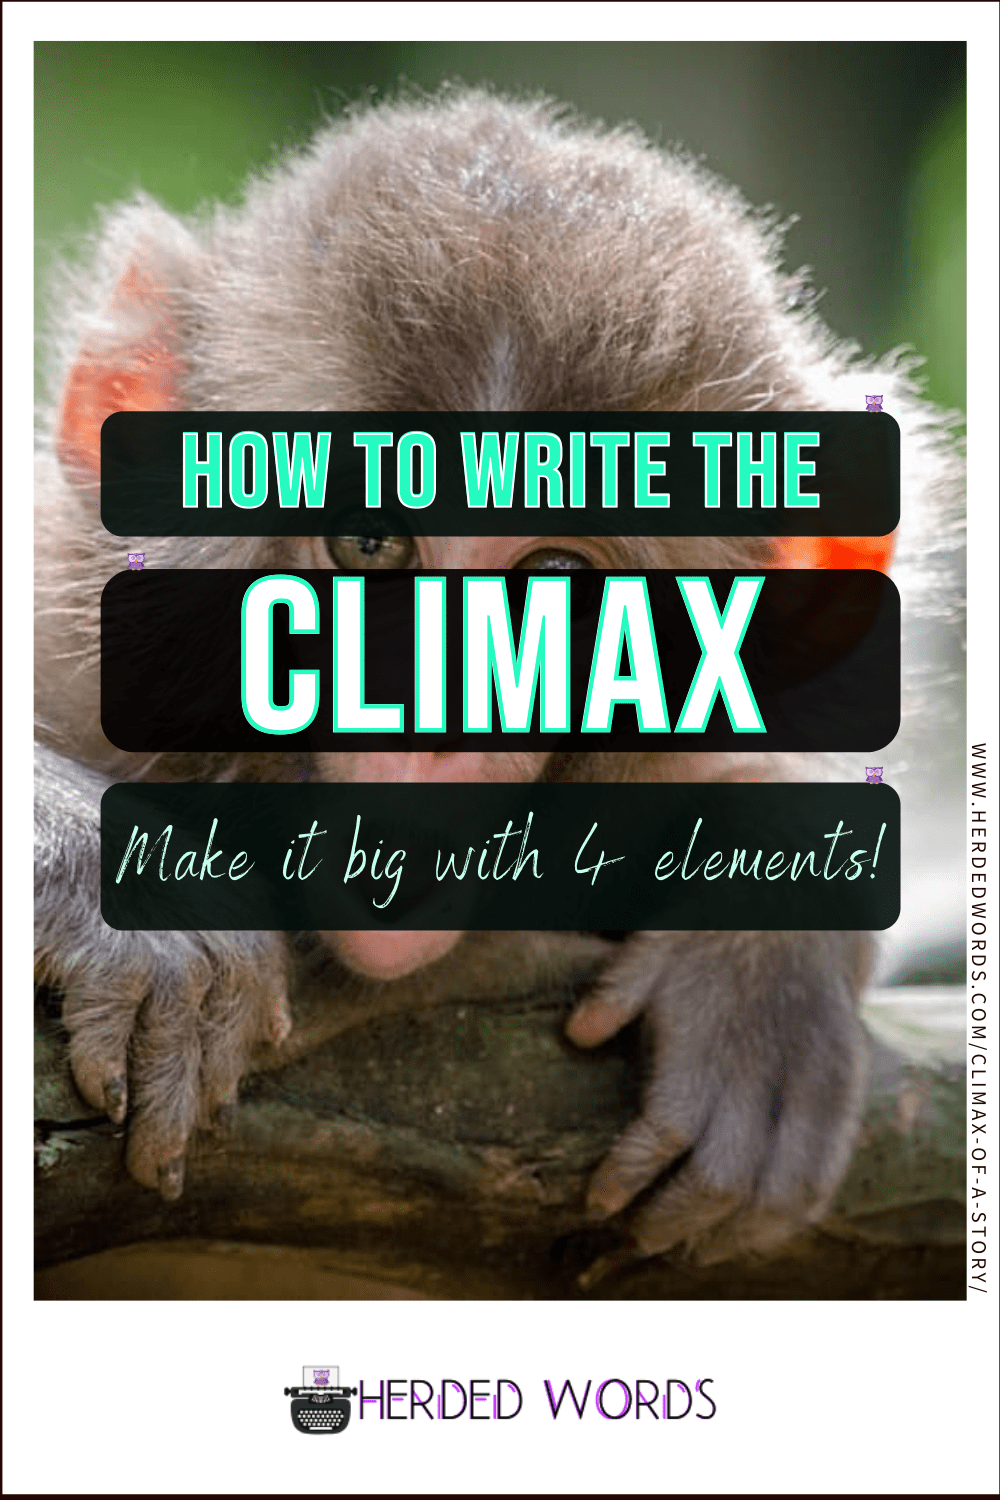 Image link to how to write the climax (make it big with 4 elements)